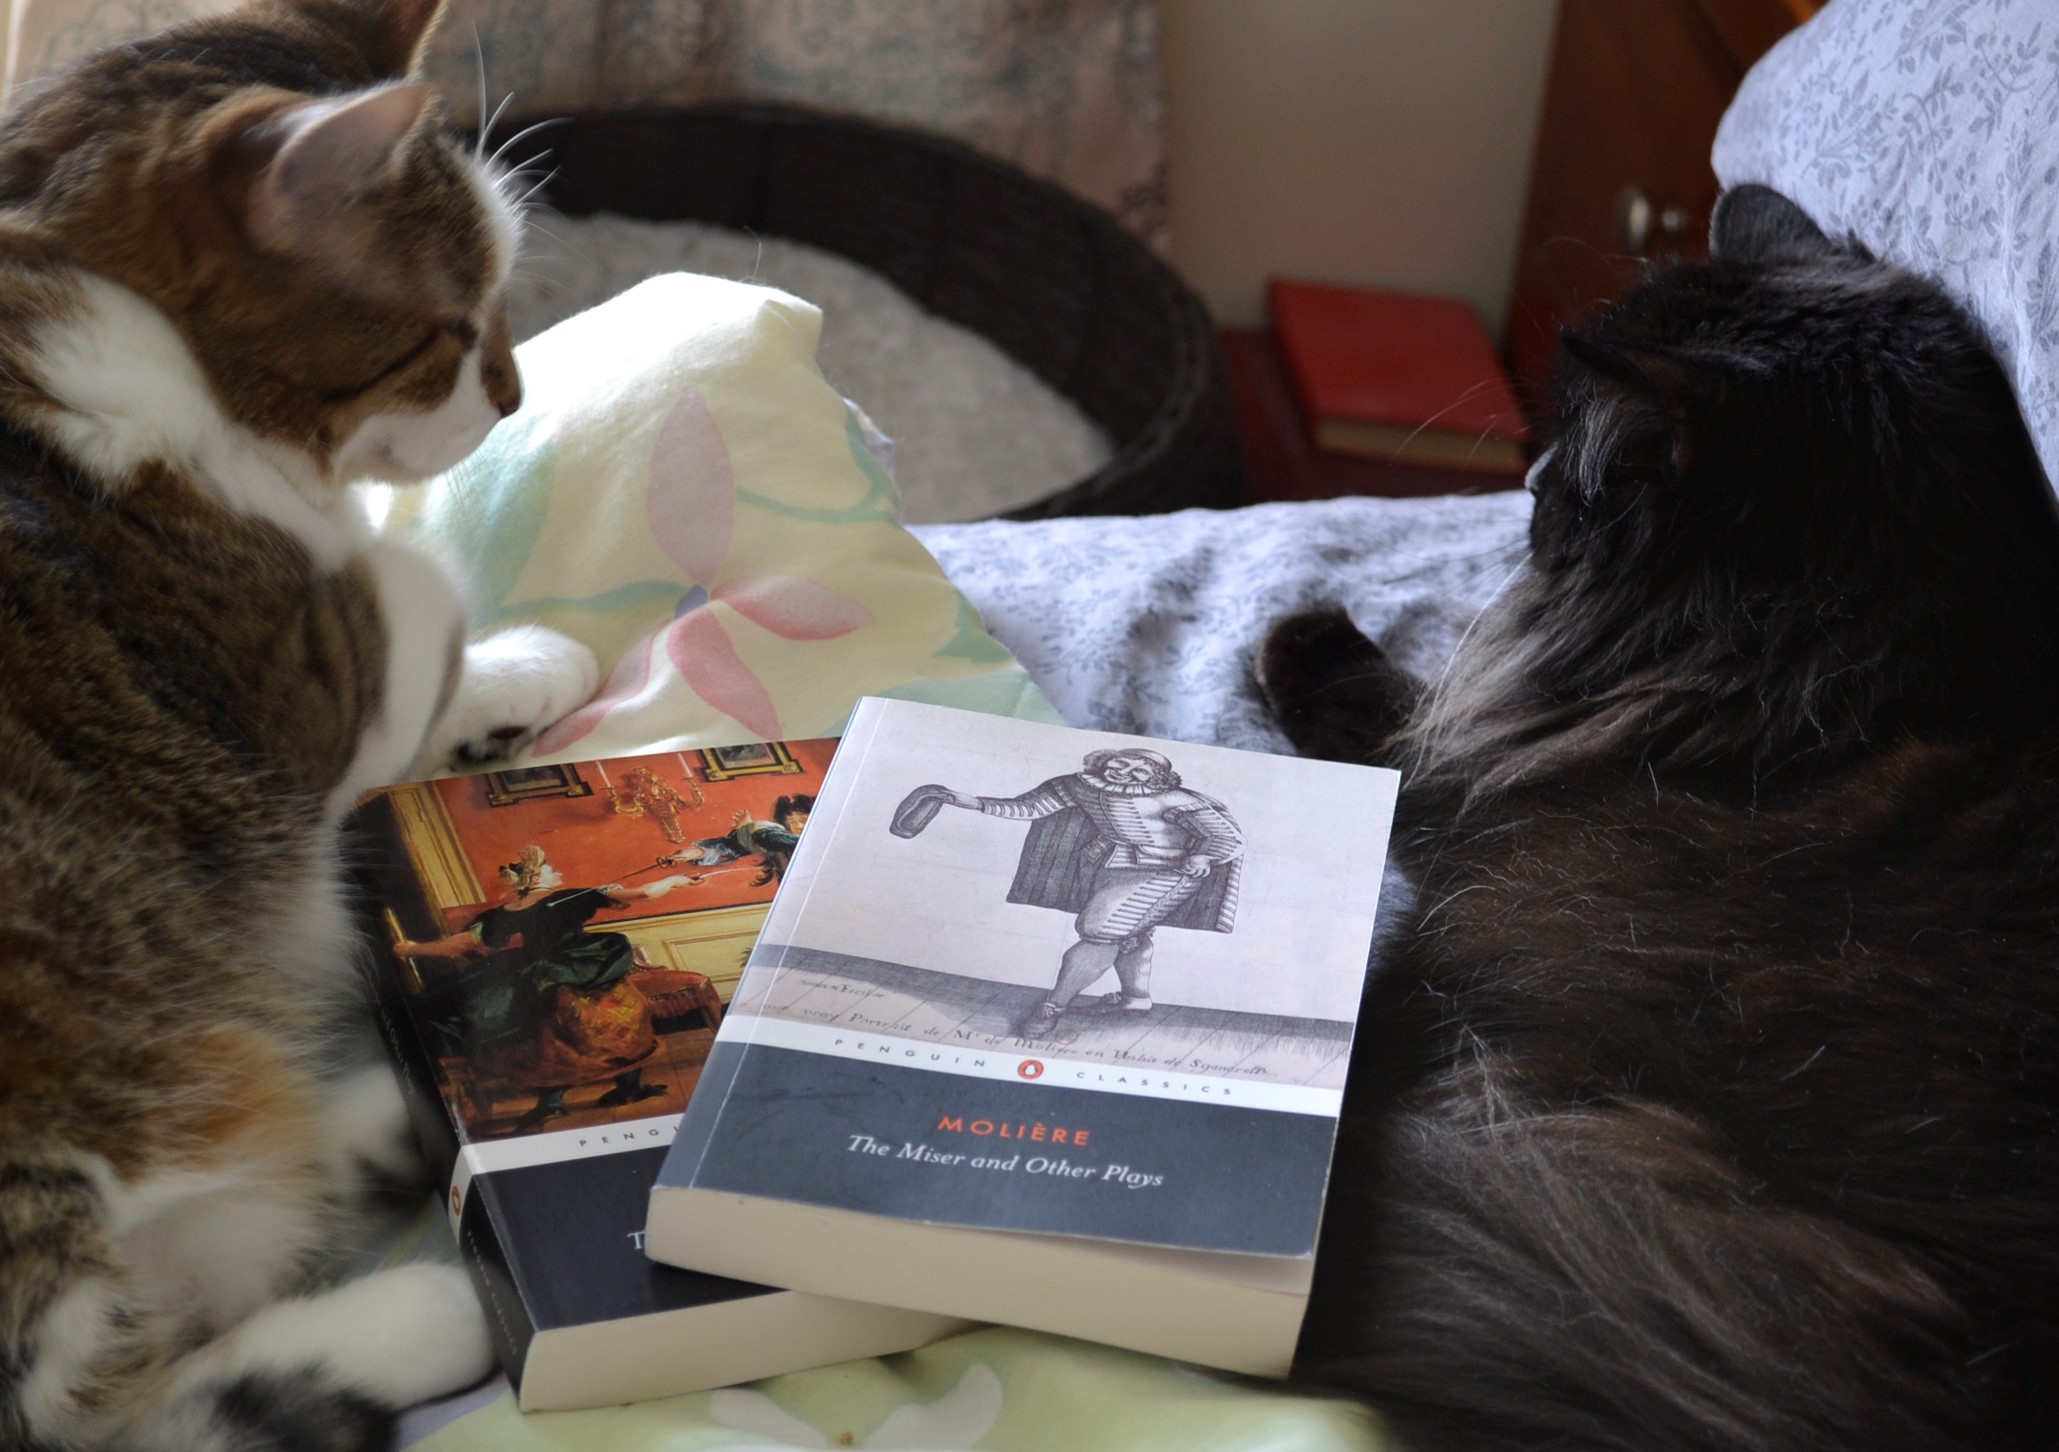 Two cats sit on either side of two volumes of Moliere's plays.